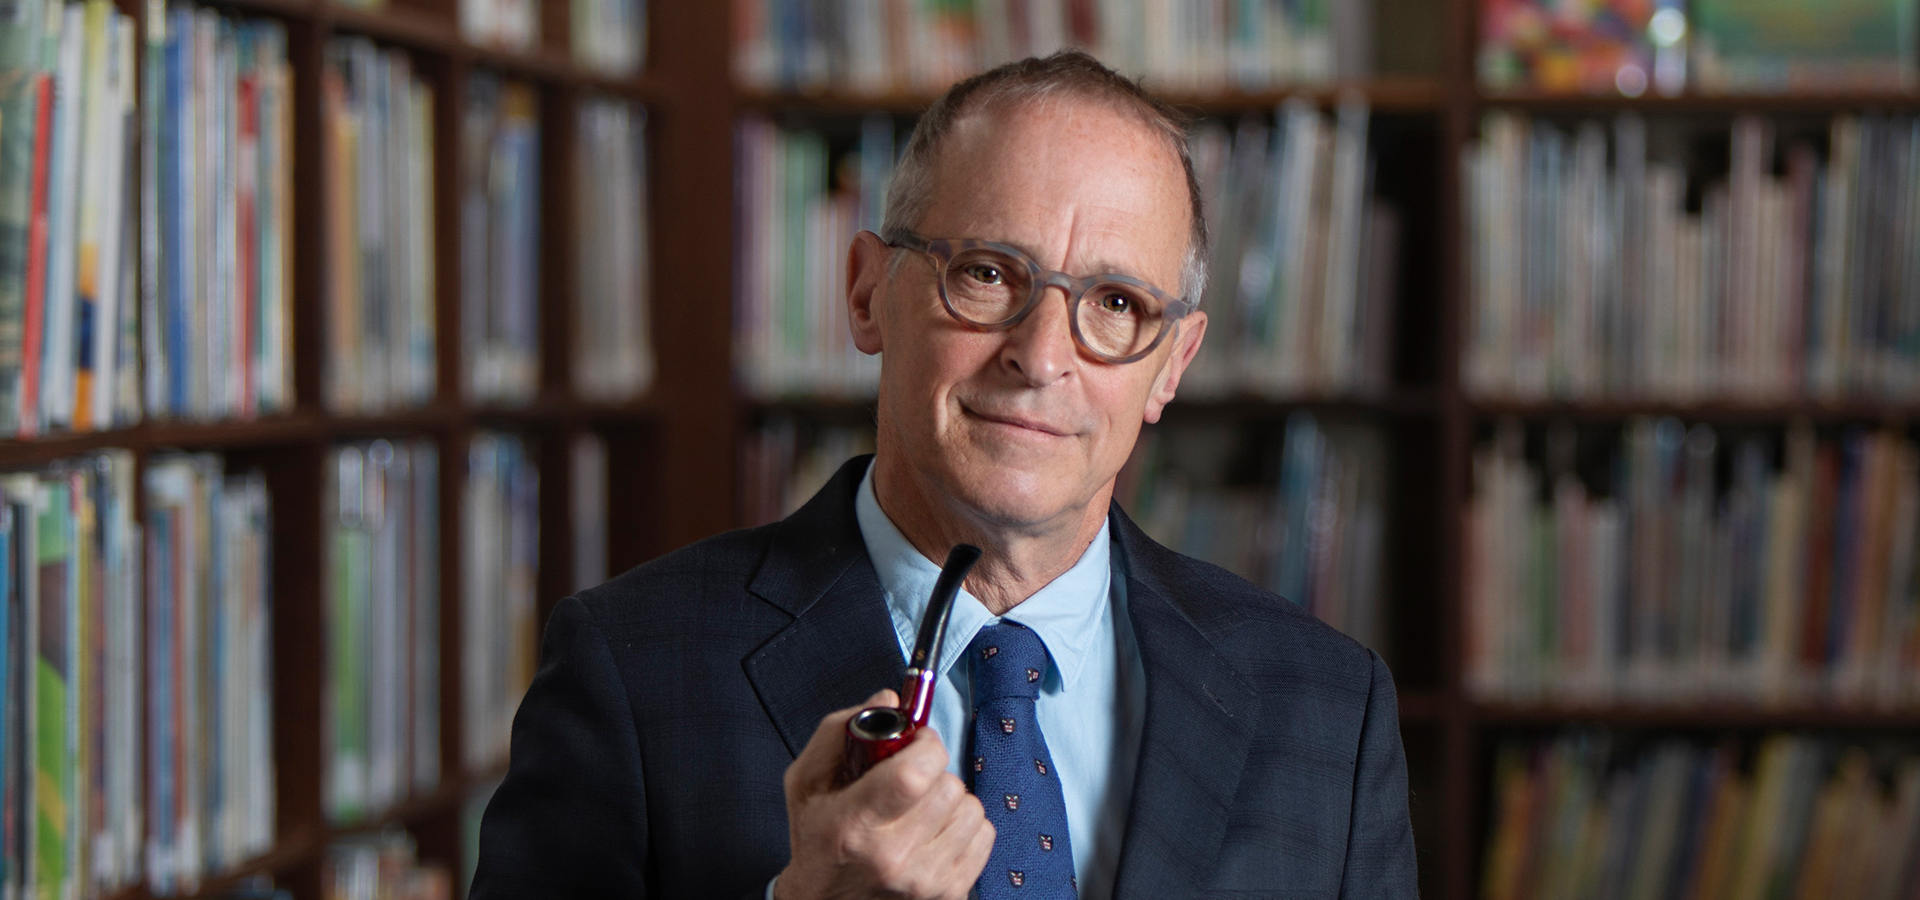 David Sedaris holding a pipe while wearing a blue suit and tie, standing in front of a wall of bookshelves.